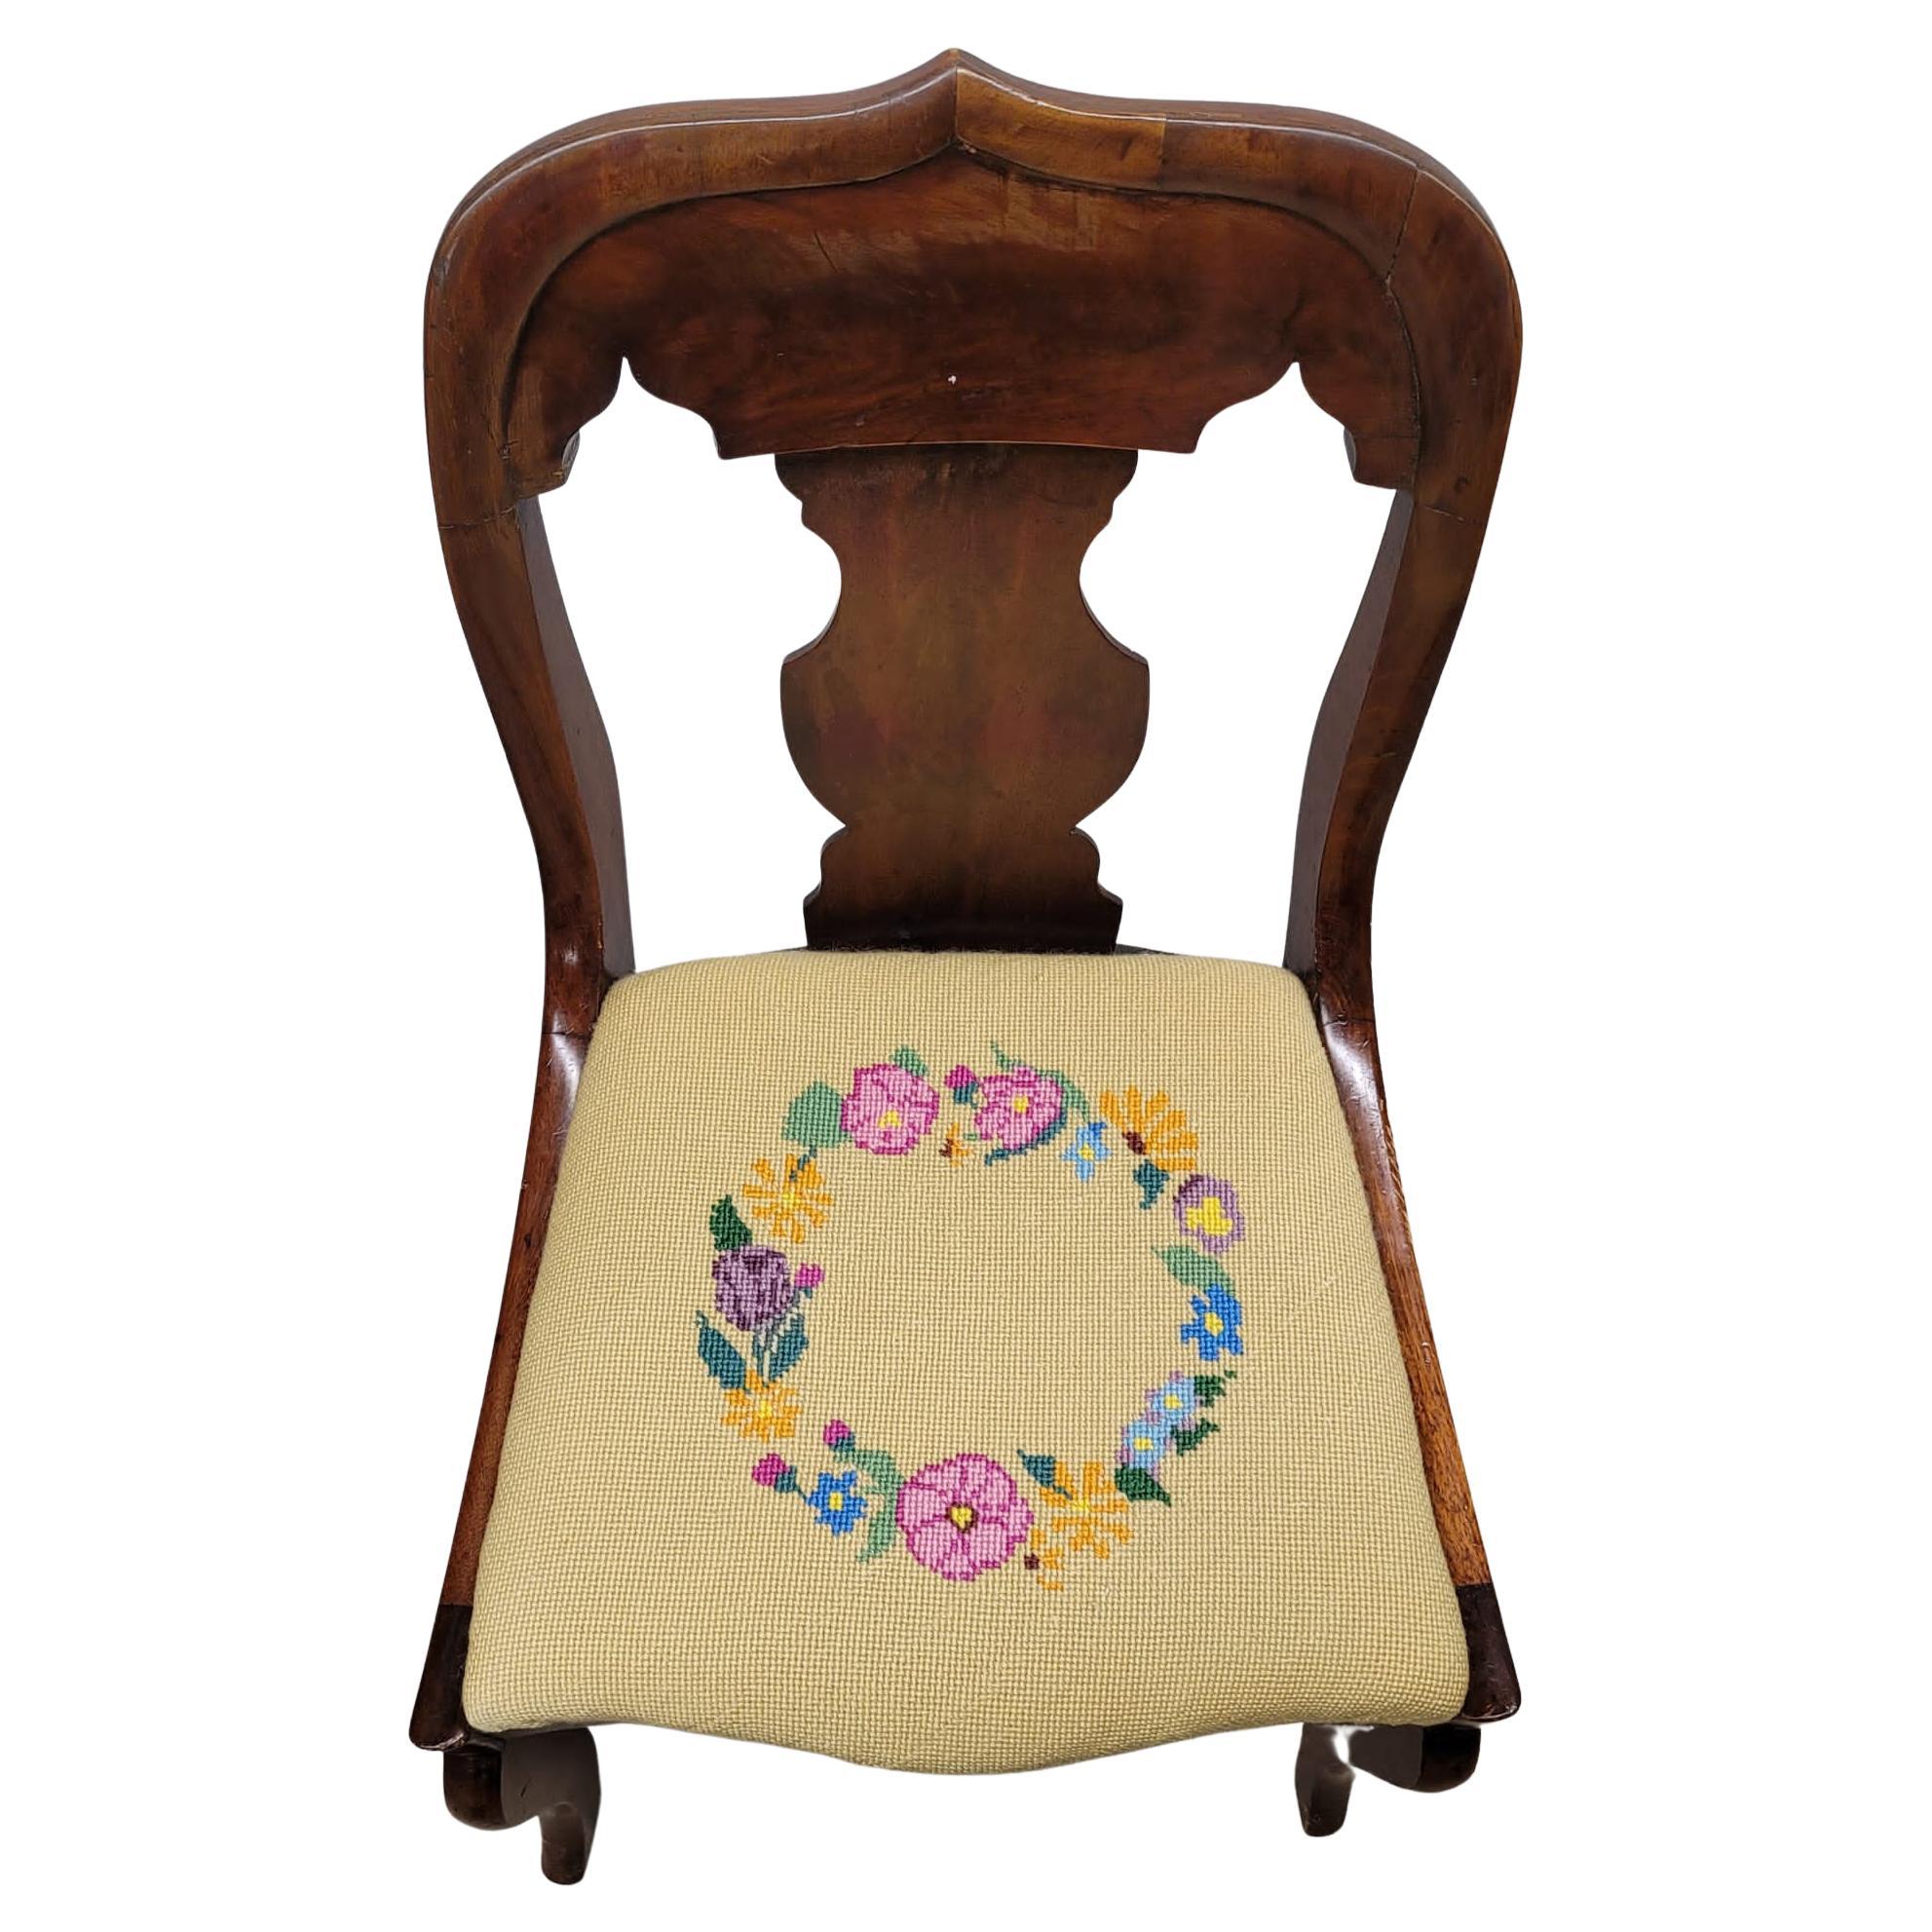 American Empire Mahogany and Needlepoint Upholstered Chair, circa 1890s In Good Condition For Sale In Germantown, MD